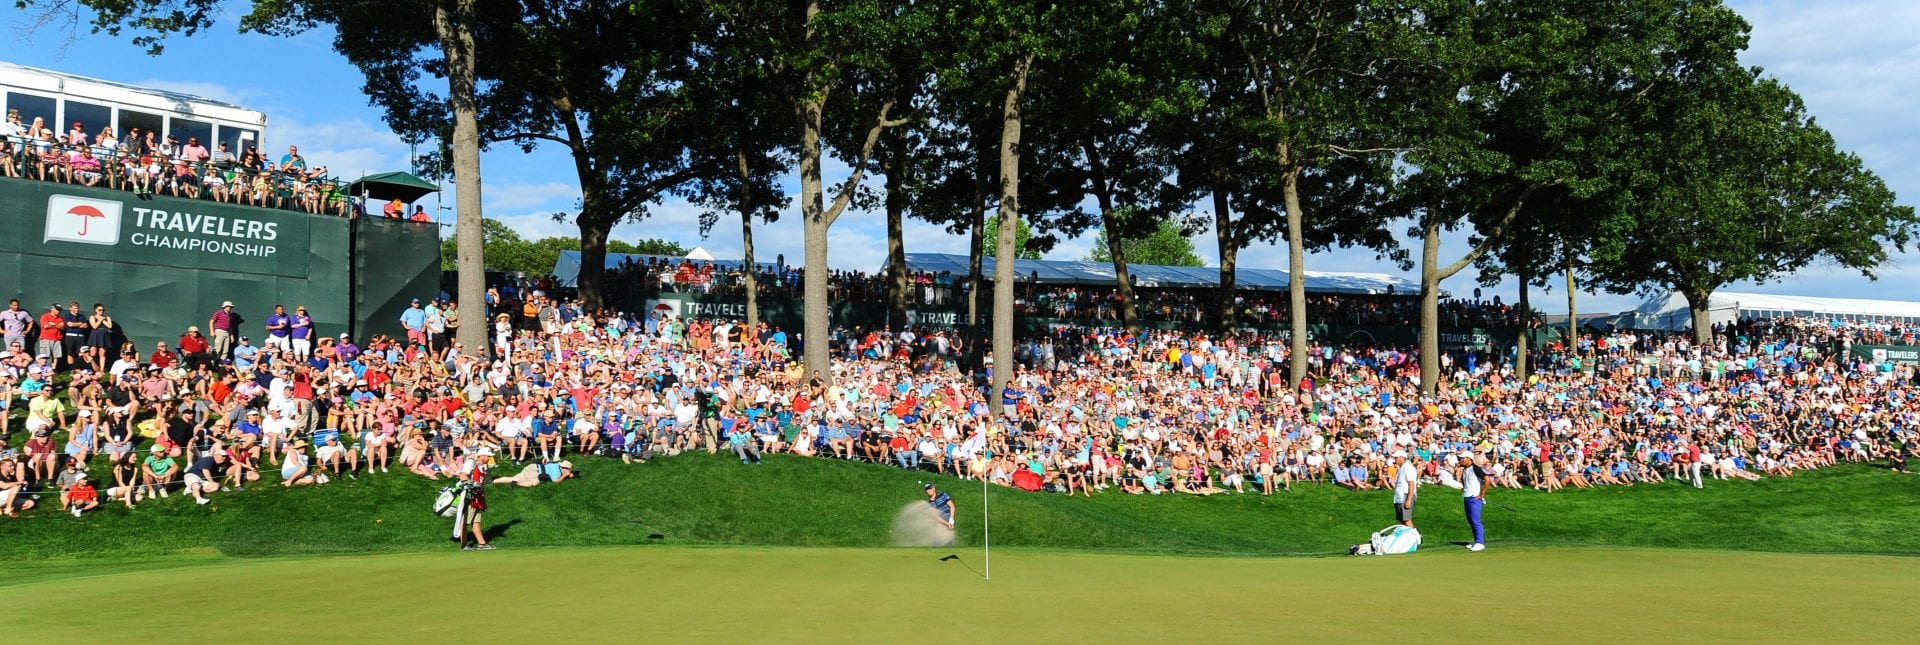 Travelers Championship announces special ticket programs New England